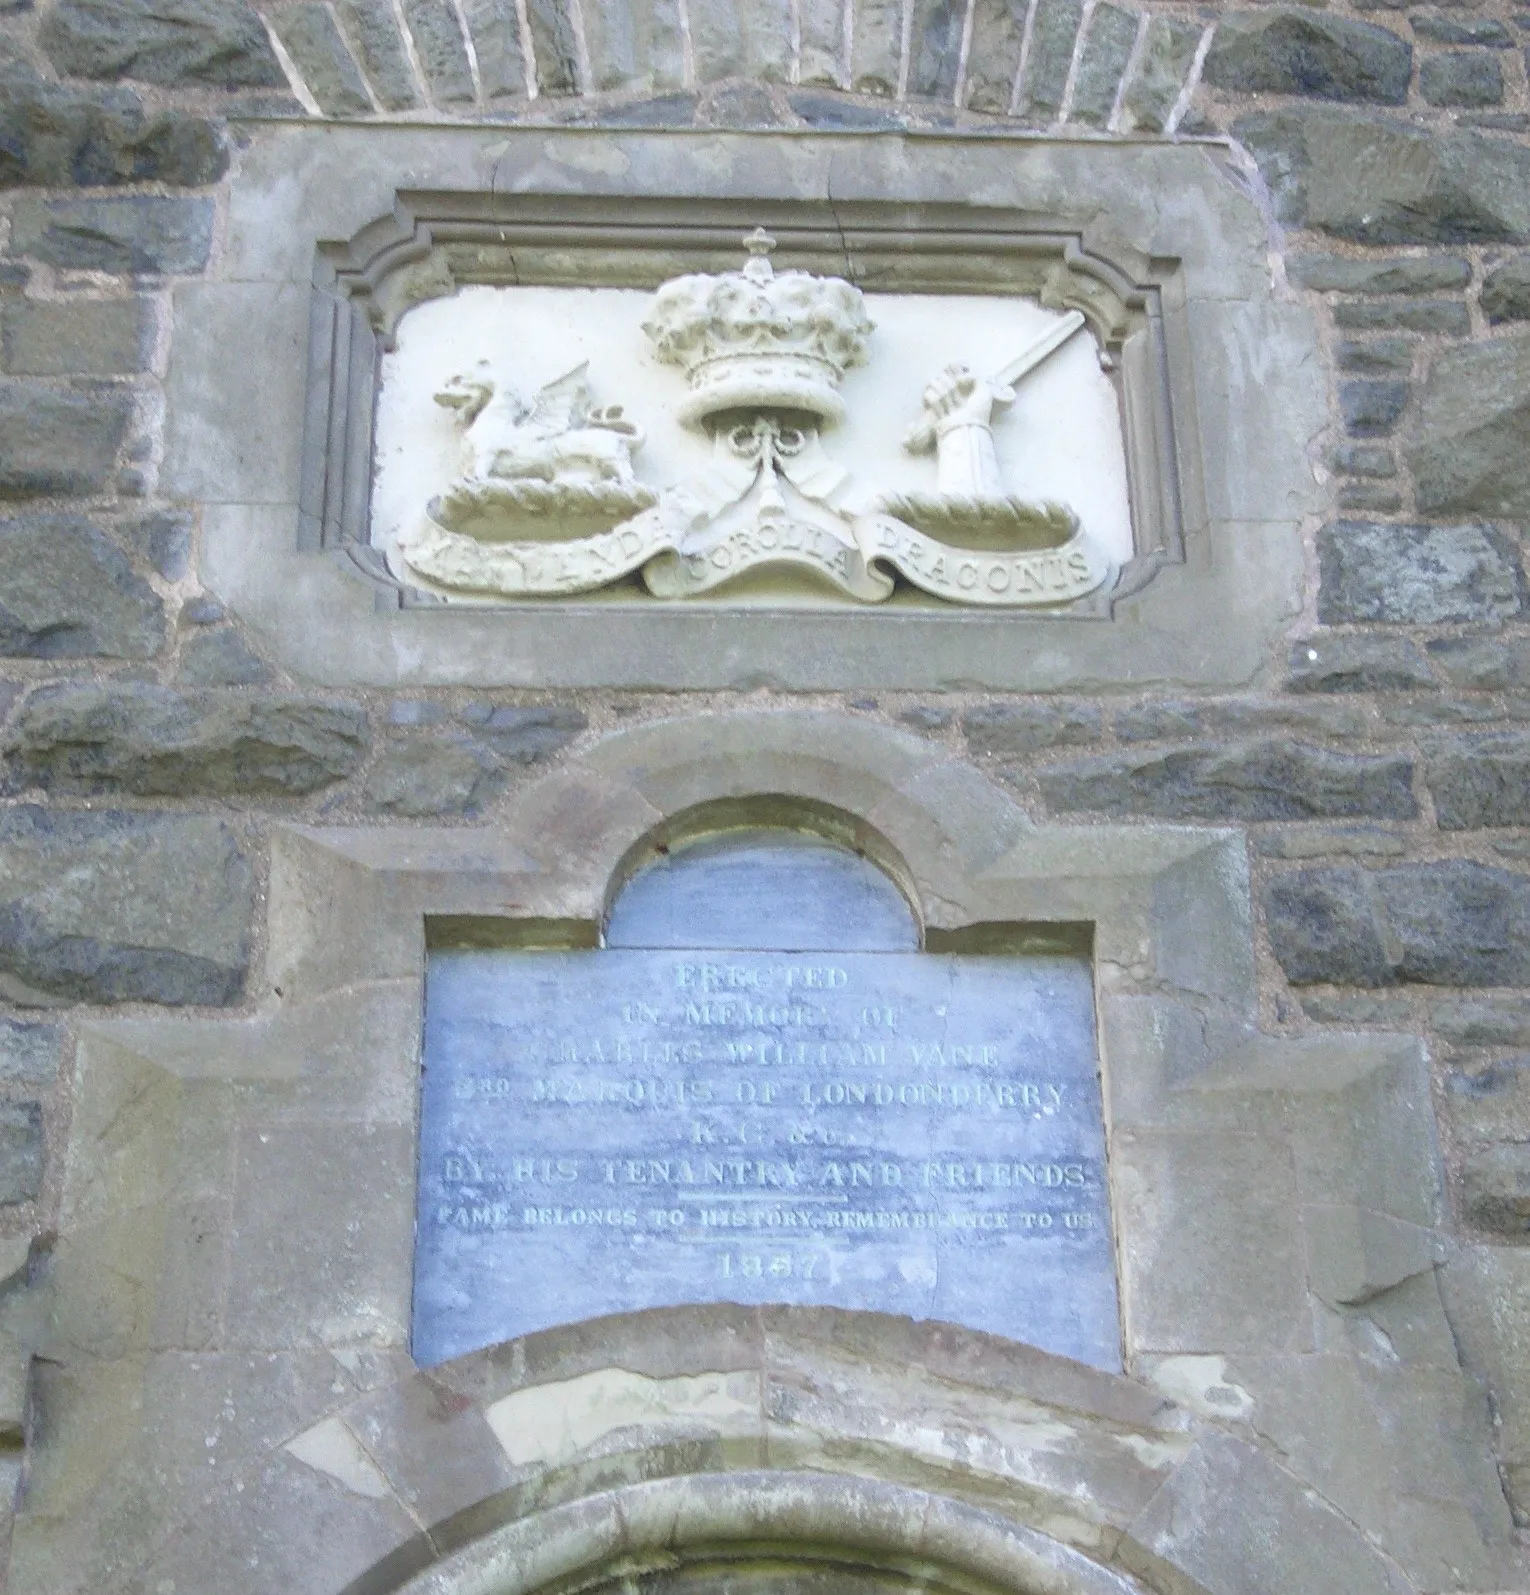 Photo showing: Scrabo Tower, Newtownards, County Down, Northern Ireland. Door lintel, plaque and coat of arms. Plaque enscription reads: "Erected in memory of Charles William Vane, 3rd Marquis of Londonderry, K.G. & c. By his tenants and friends. Fame belongs to history. Rememberance to us. 1857.". Coat of arms/motto reads: " Metuenda corolla draconis" (Latin: The dragon’s crest is to be feared =  Stewart/Londonderry motto). (Taken with Casio Exilim EXS100 on Sunday 20th May 2007 at 13:00 - minor crop from original)